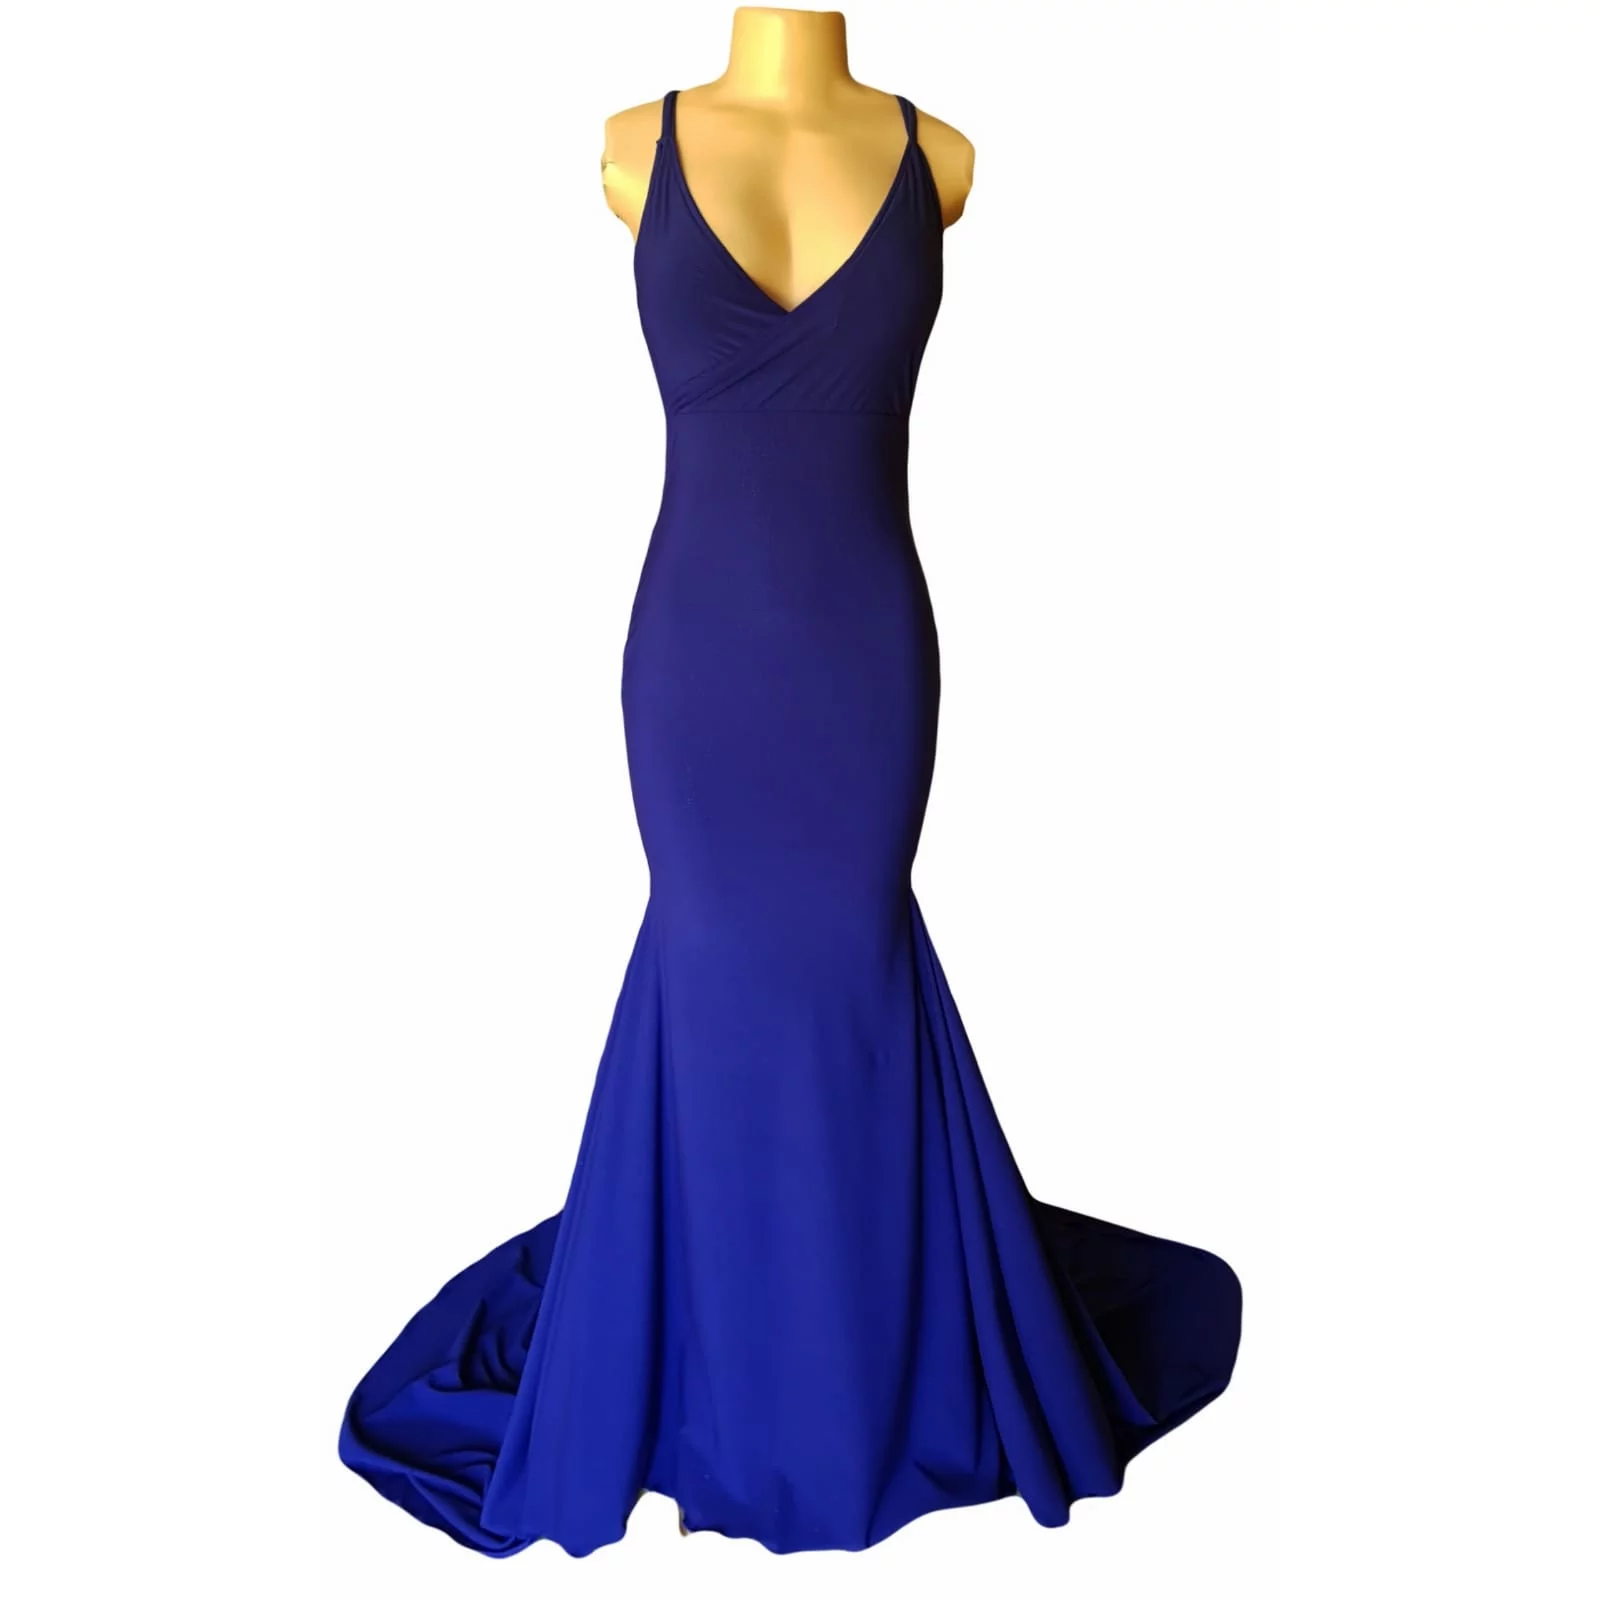 Royal blue soft mermaid cross busted prom dress 3 royal blue soft mermaid cross busted prom dress with an open back with crossed strap detail.